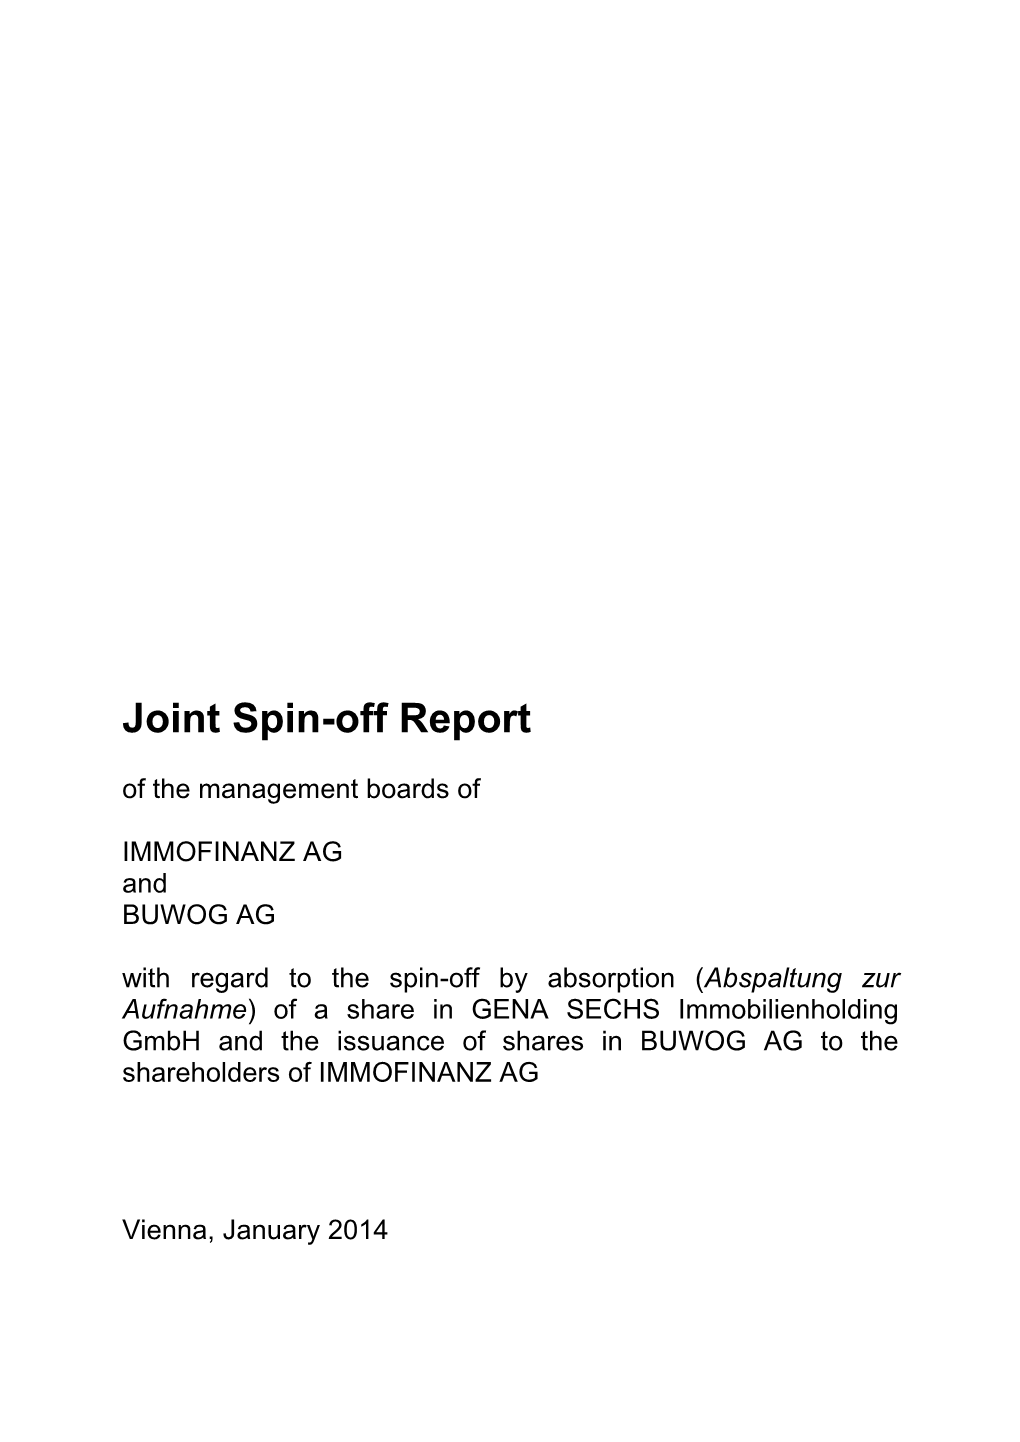 Joint Spin-Off Report of the Management Boards Of